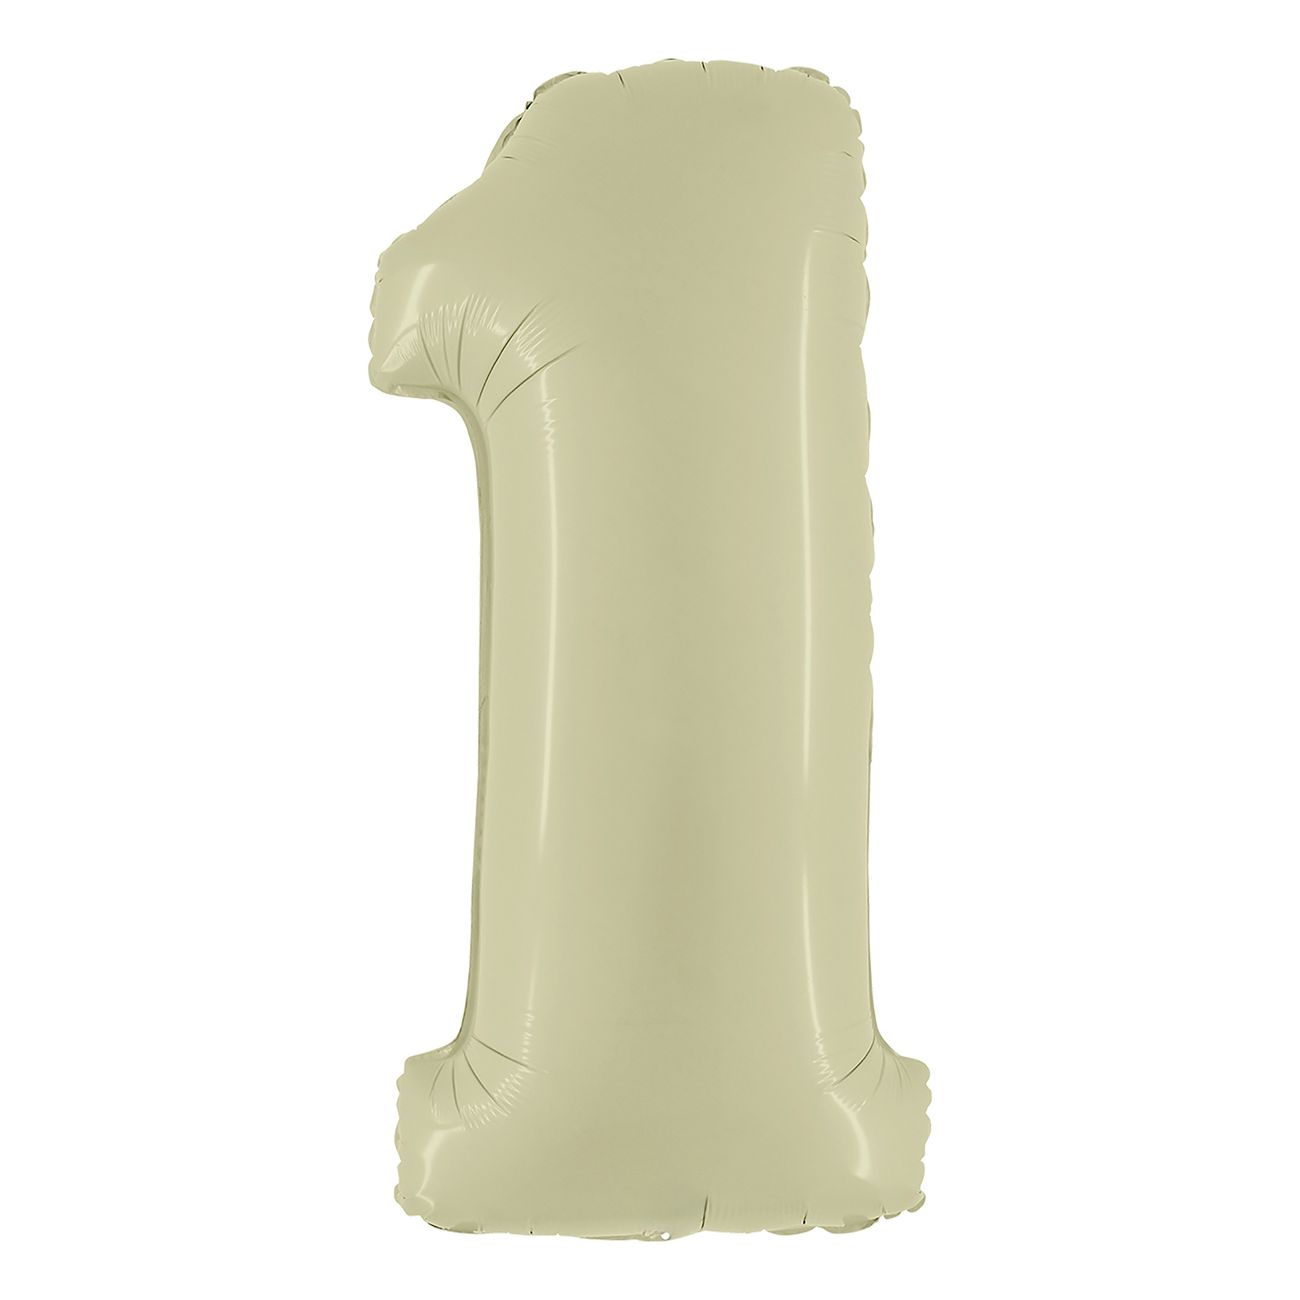 sifferballong-satin-olive-green-92268-14